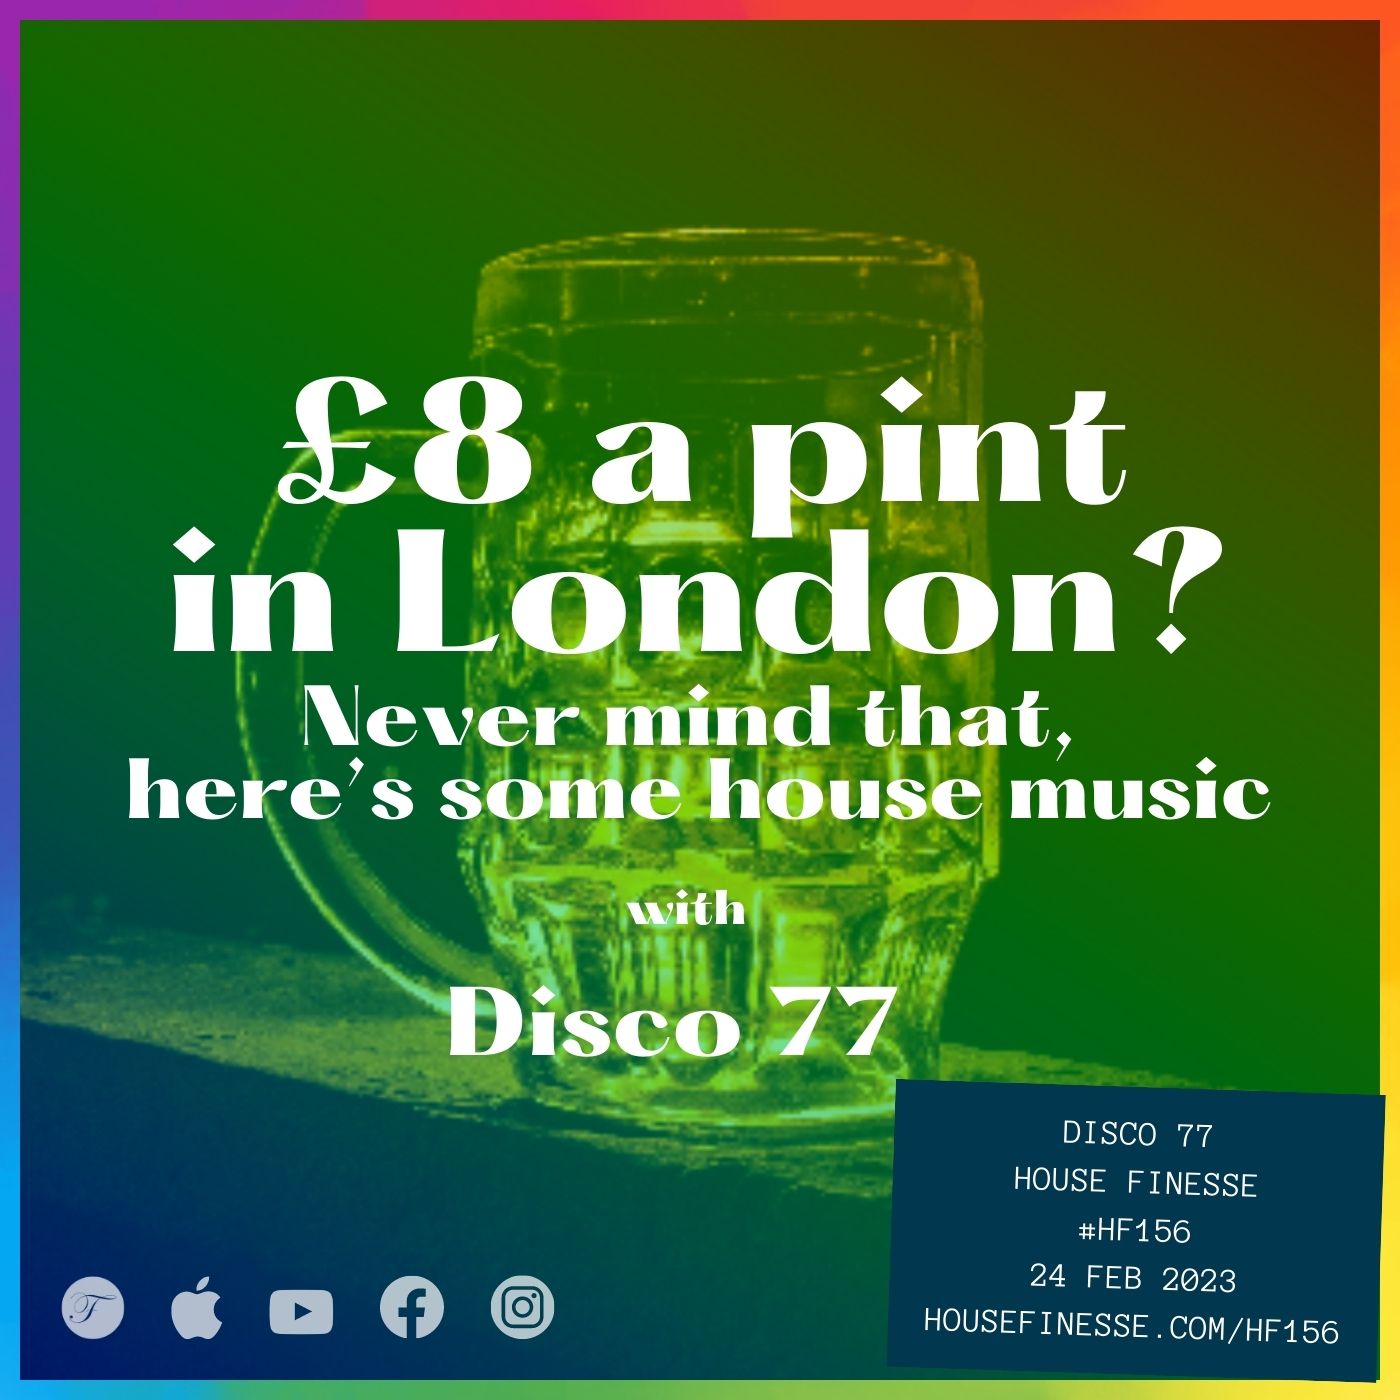 £8 a pint in London? Never mind that, here’s some house music with Disco77